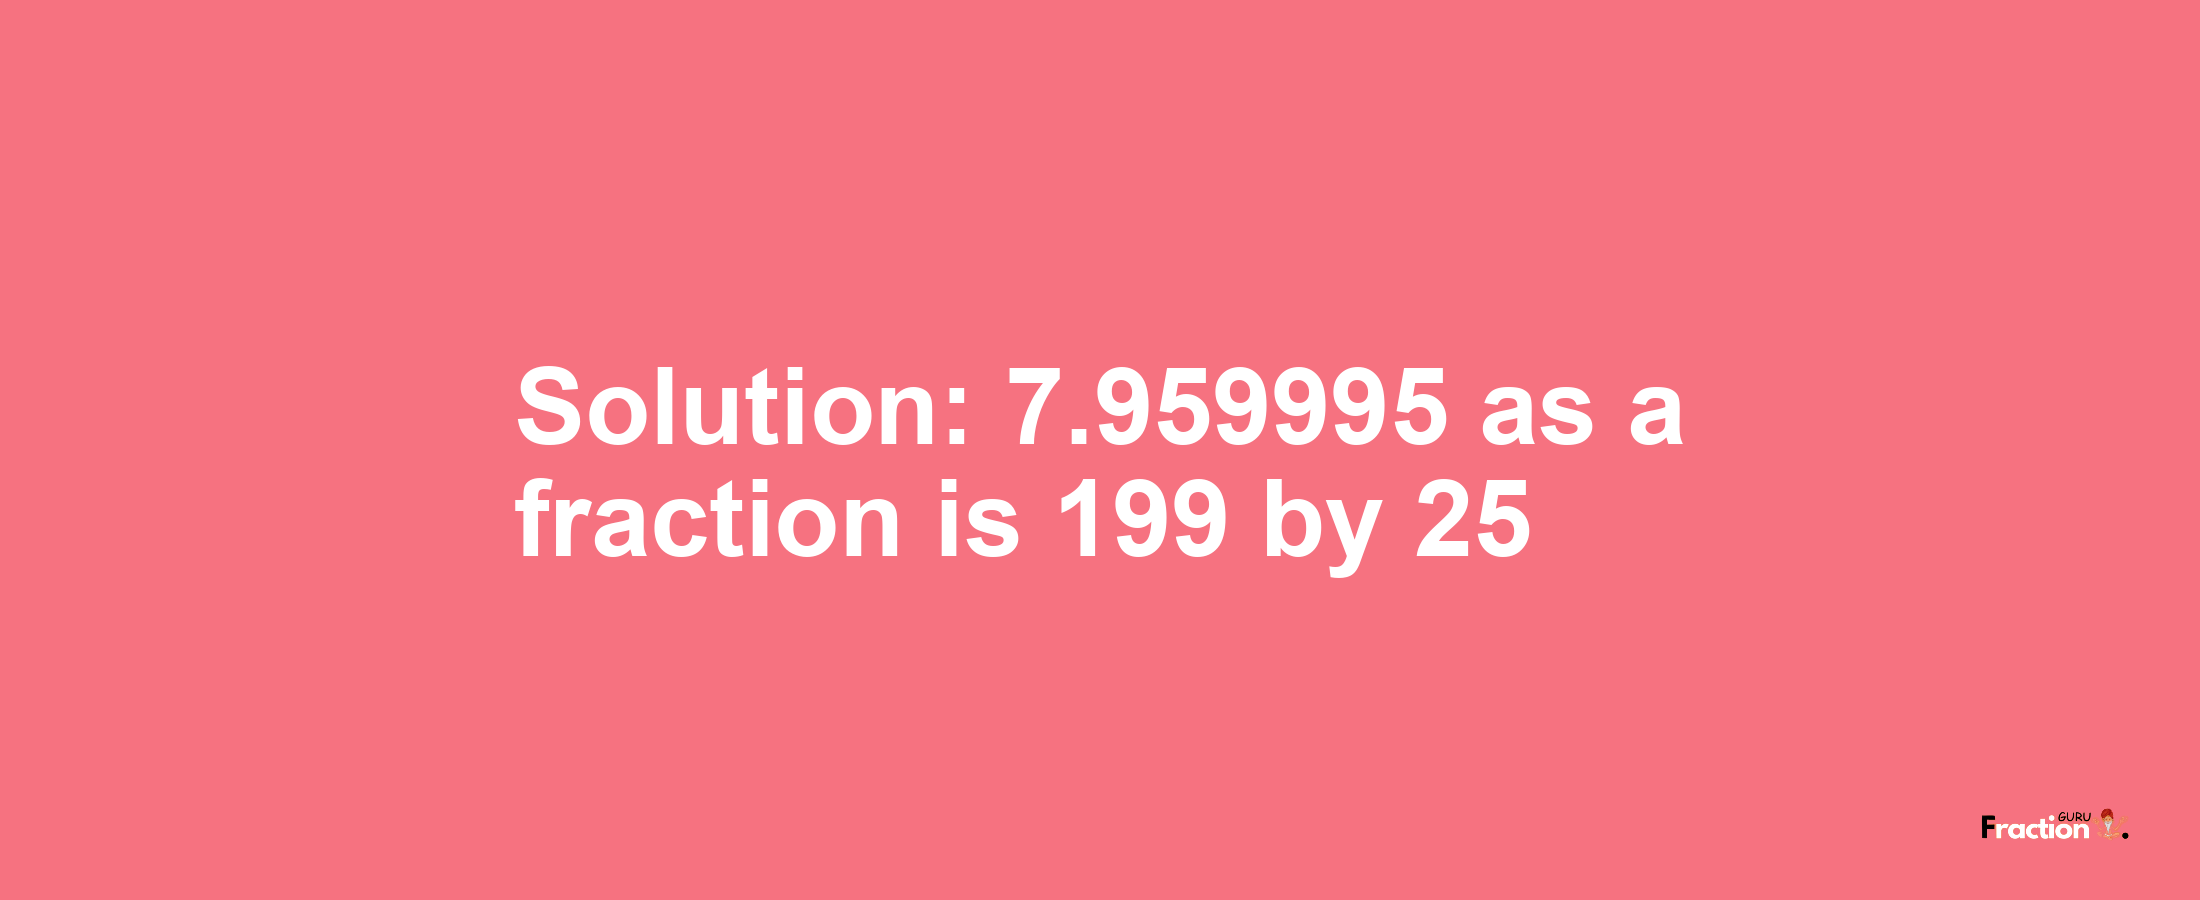 Solution:7.959995 as a fraction is 199/25